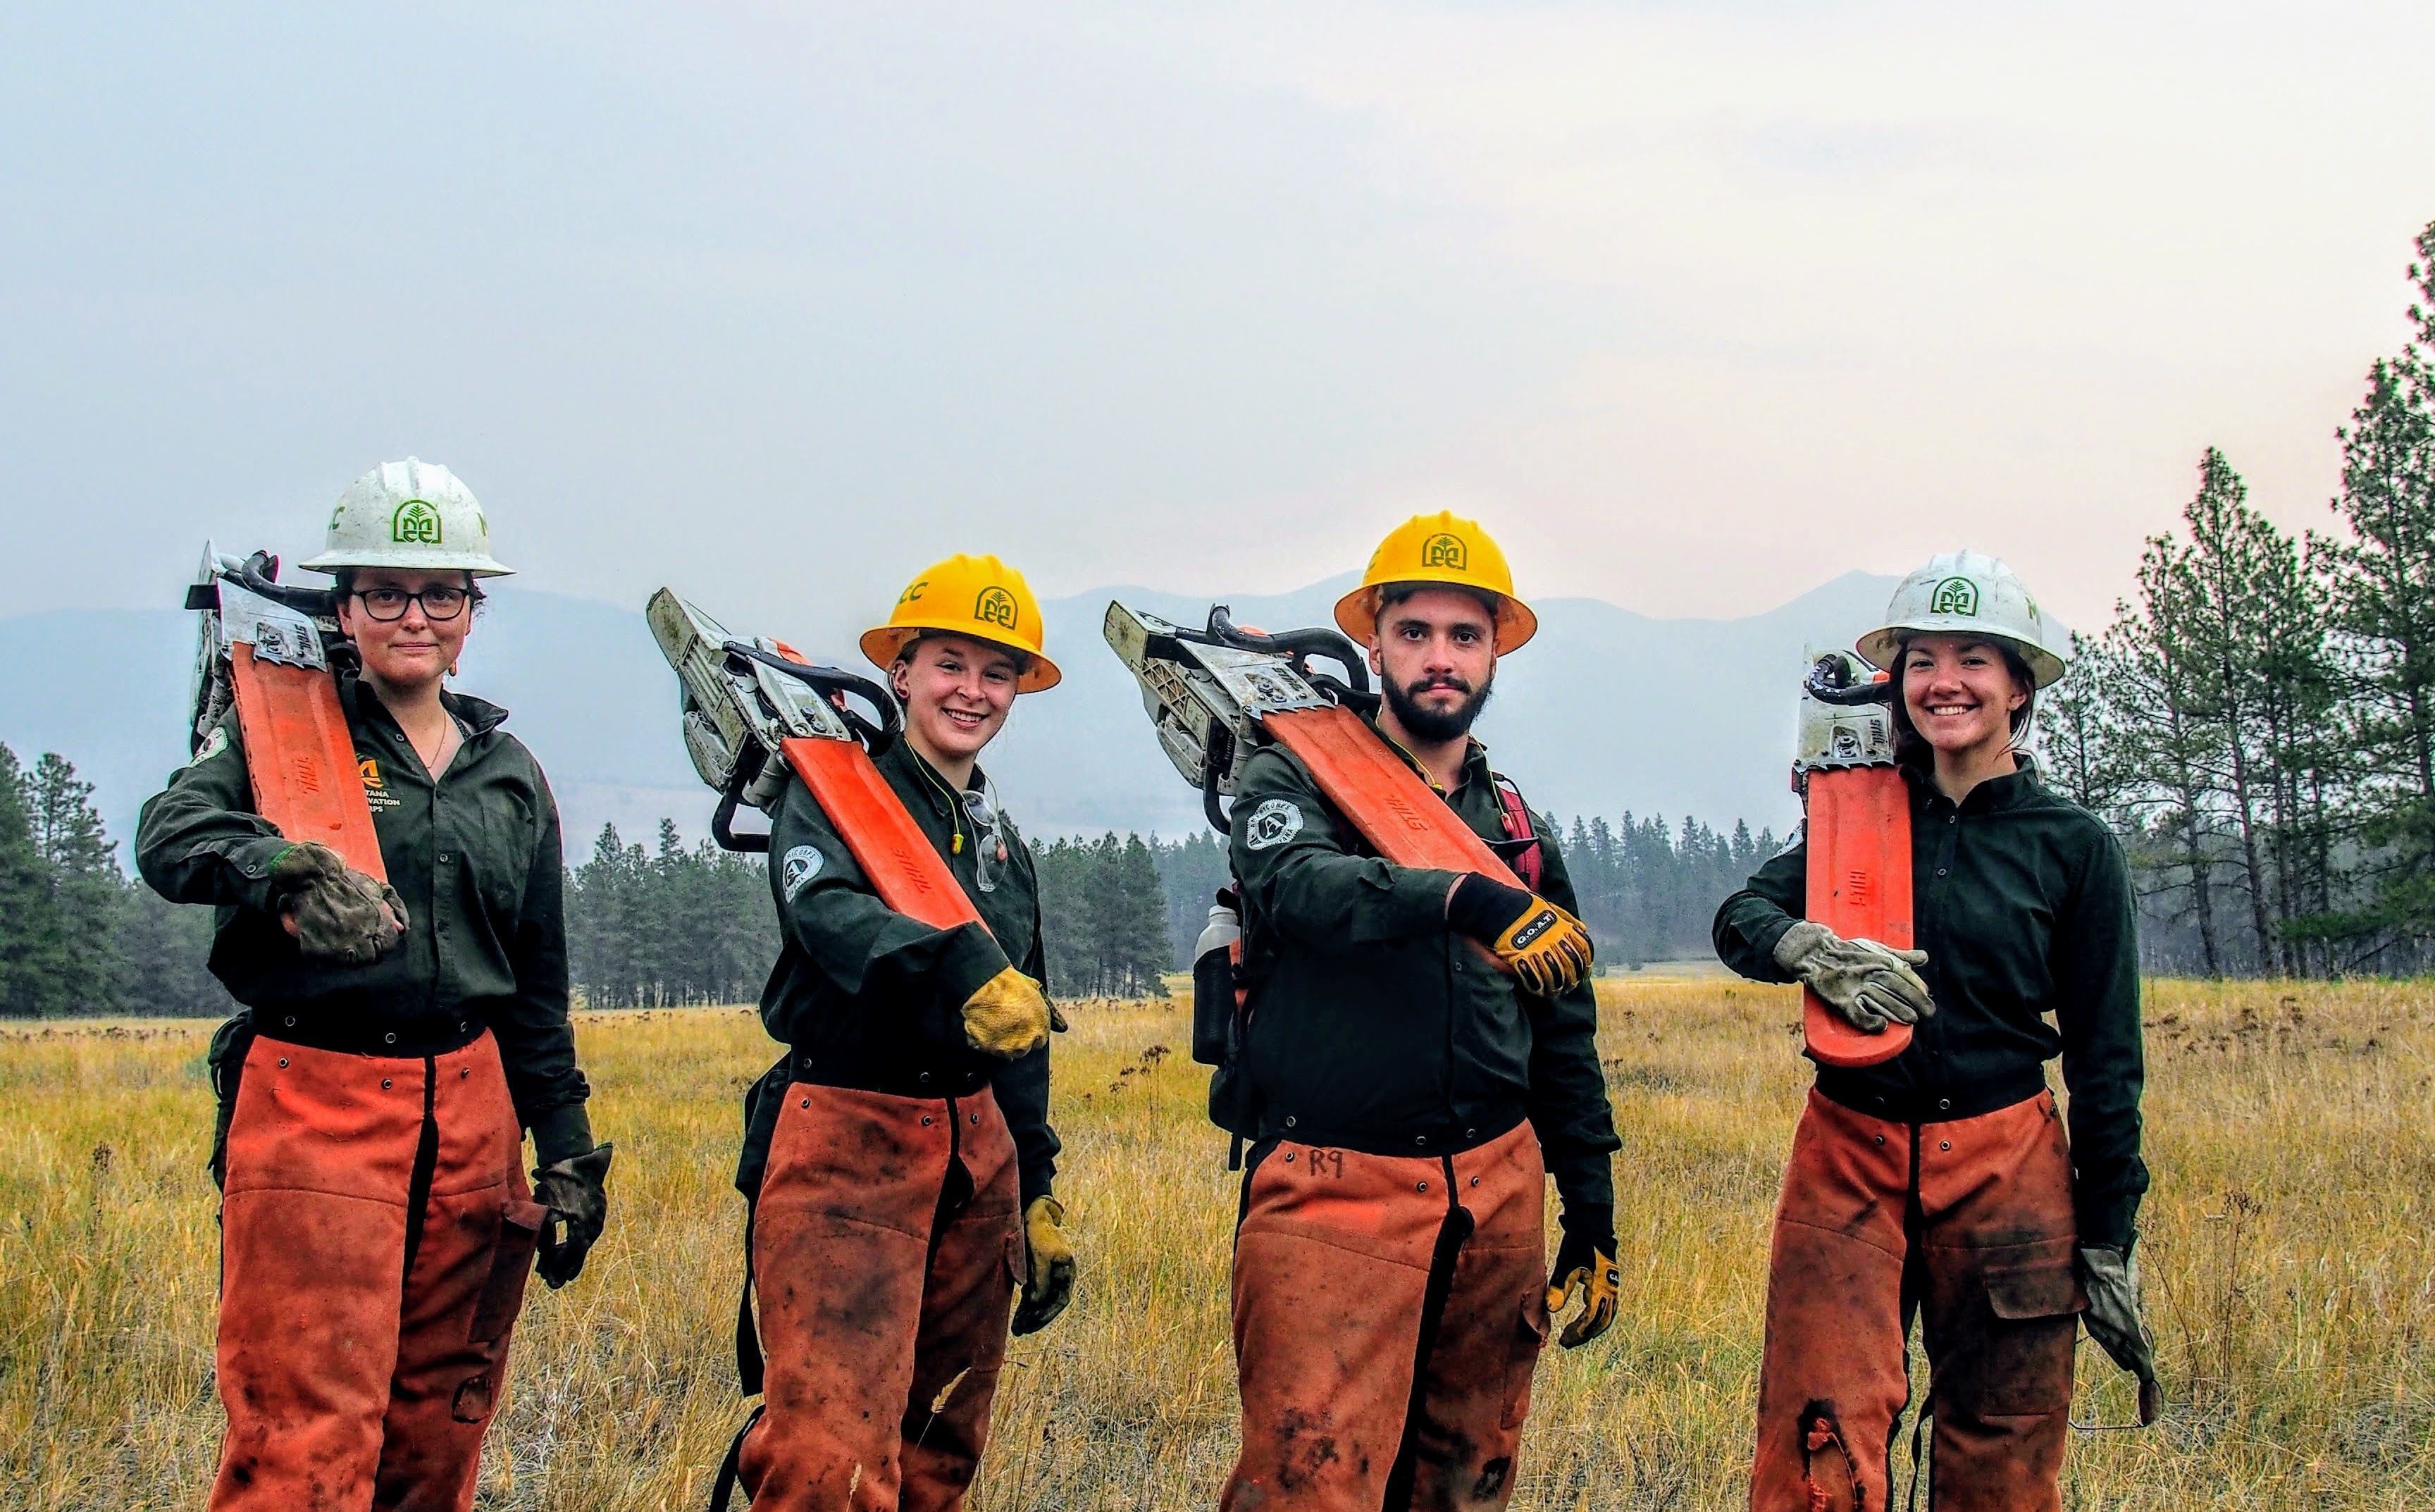 [Image description: Four MCC members holding their chainsaws (with the safety guard on) over their shoulders. In the background, one can see a smoky pink sky.]